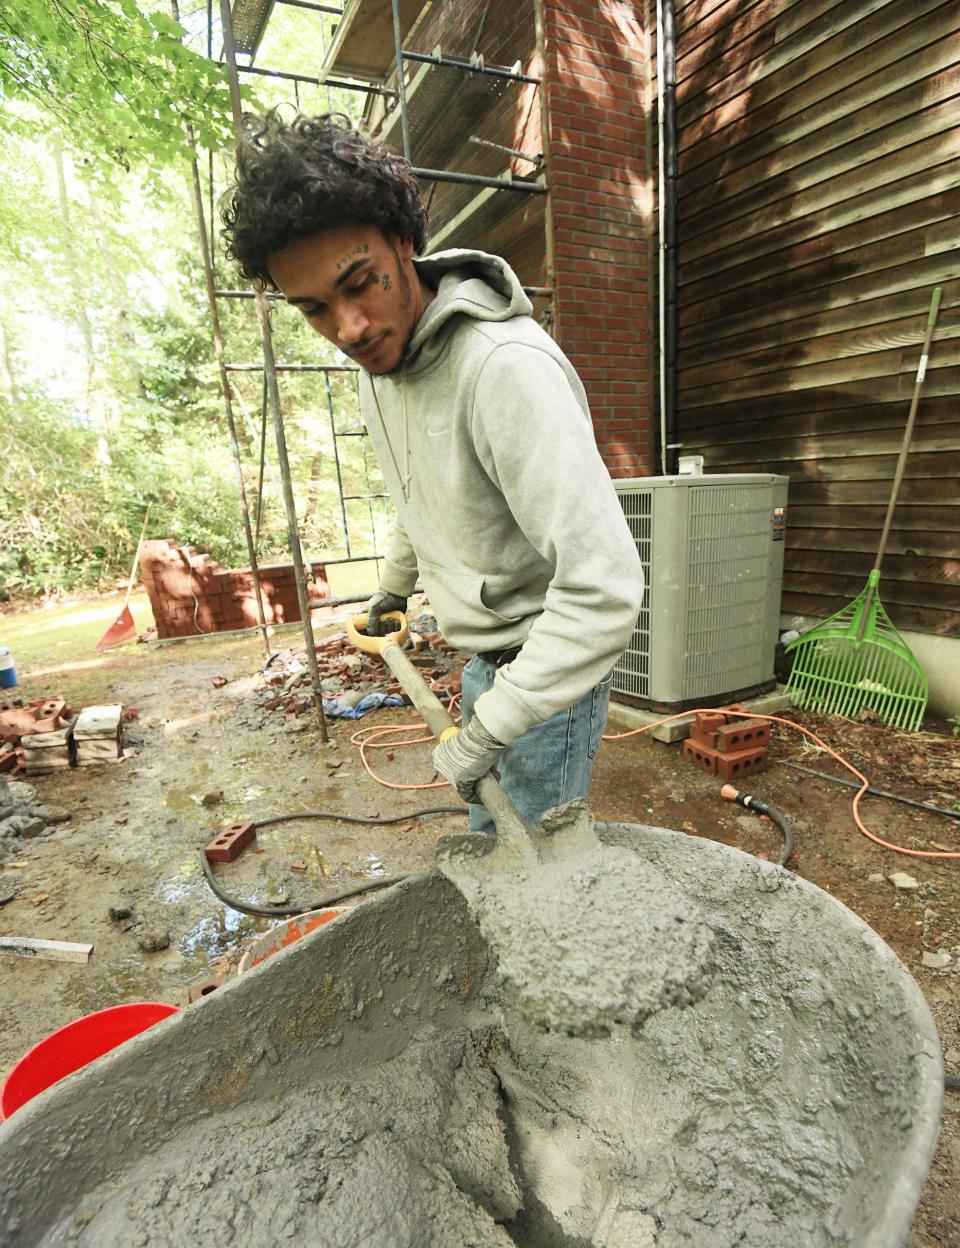 Malcom Greene, 22, of Norwich, mixes a bucket of mortar to bring to Jesse Baier of Colchester, co-owner of JLS Premier Masonry & Construction in Colchester, as they work on replacing a chimney in Colchester Sept. 8.